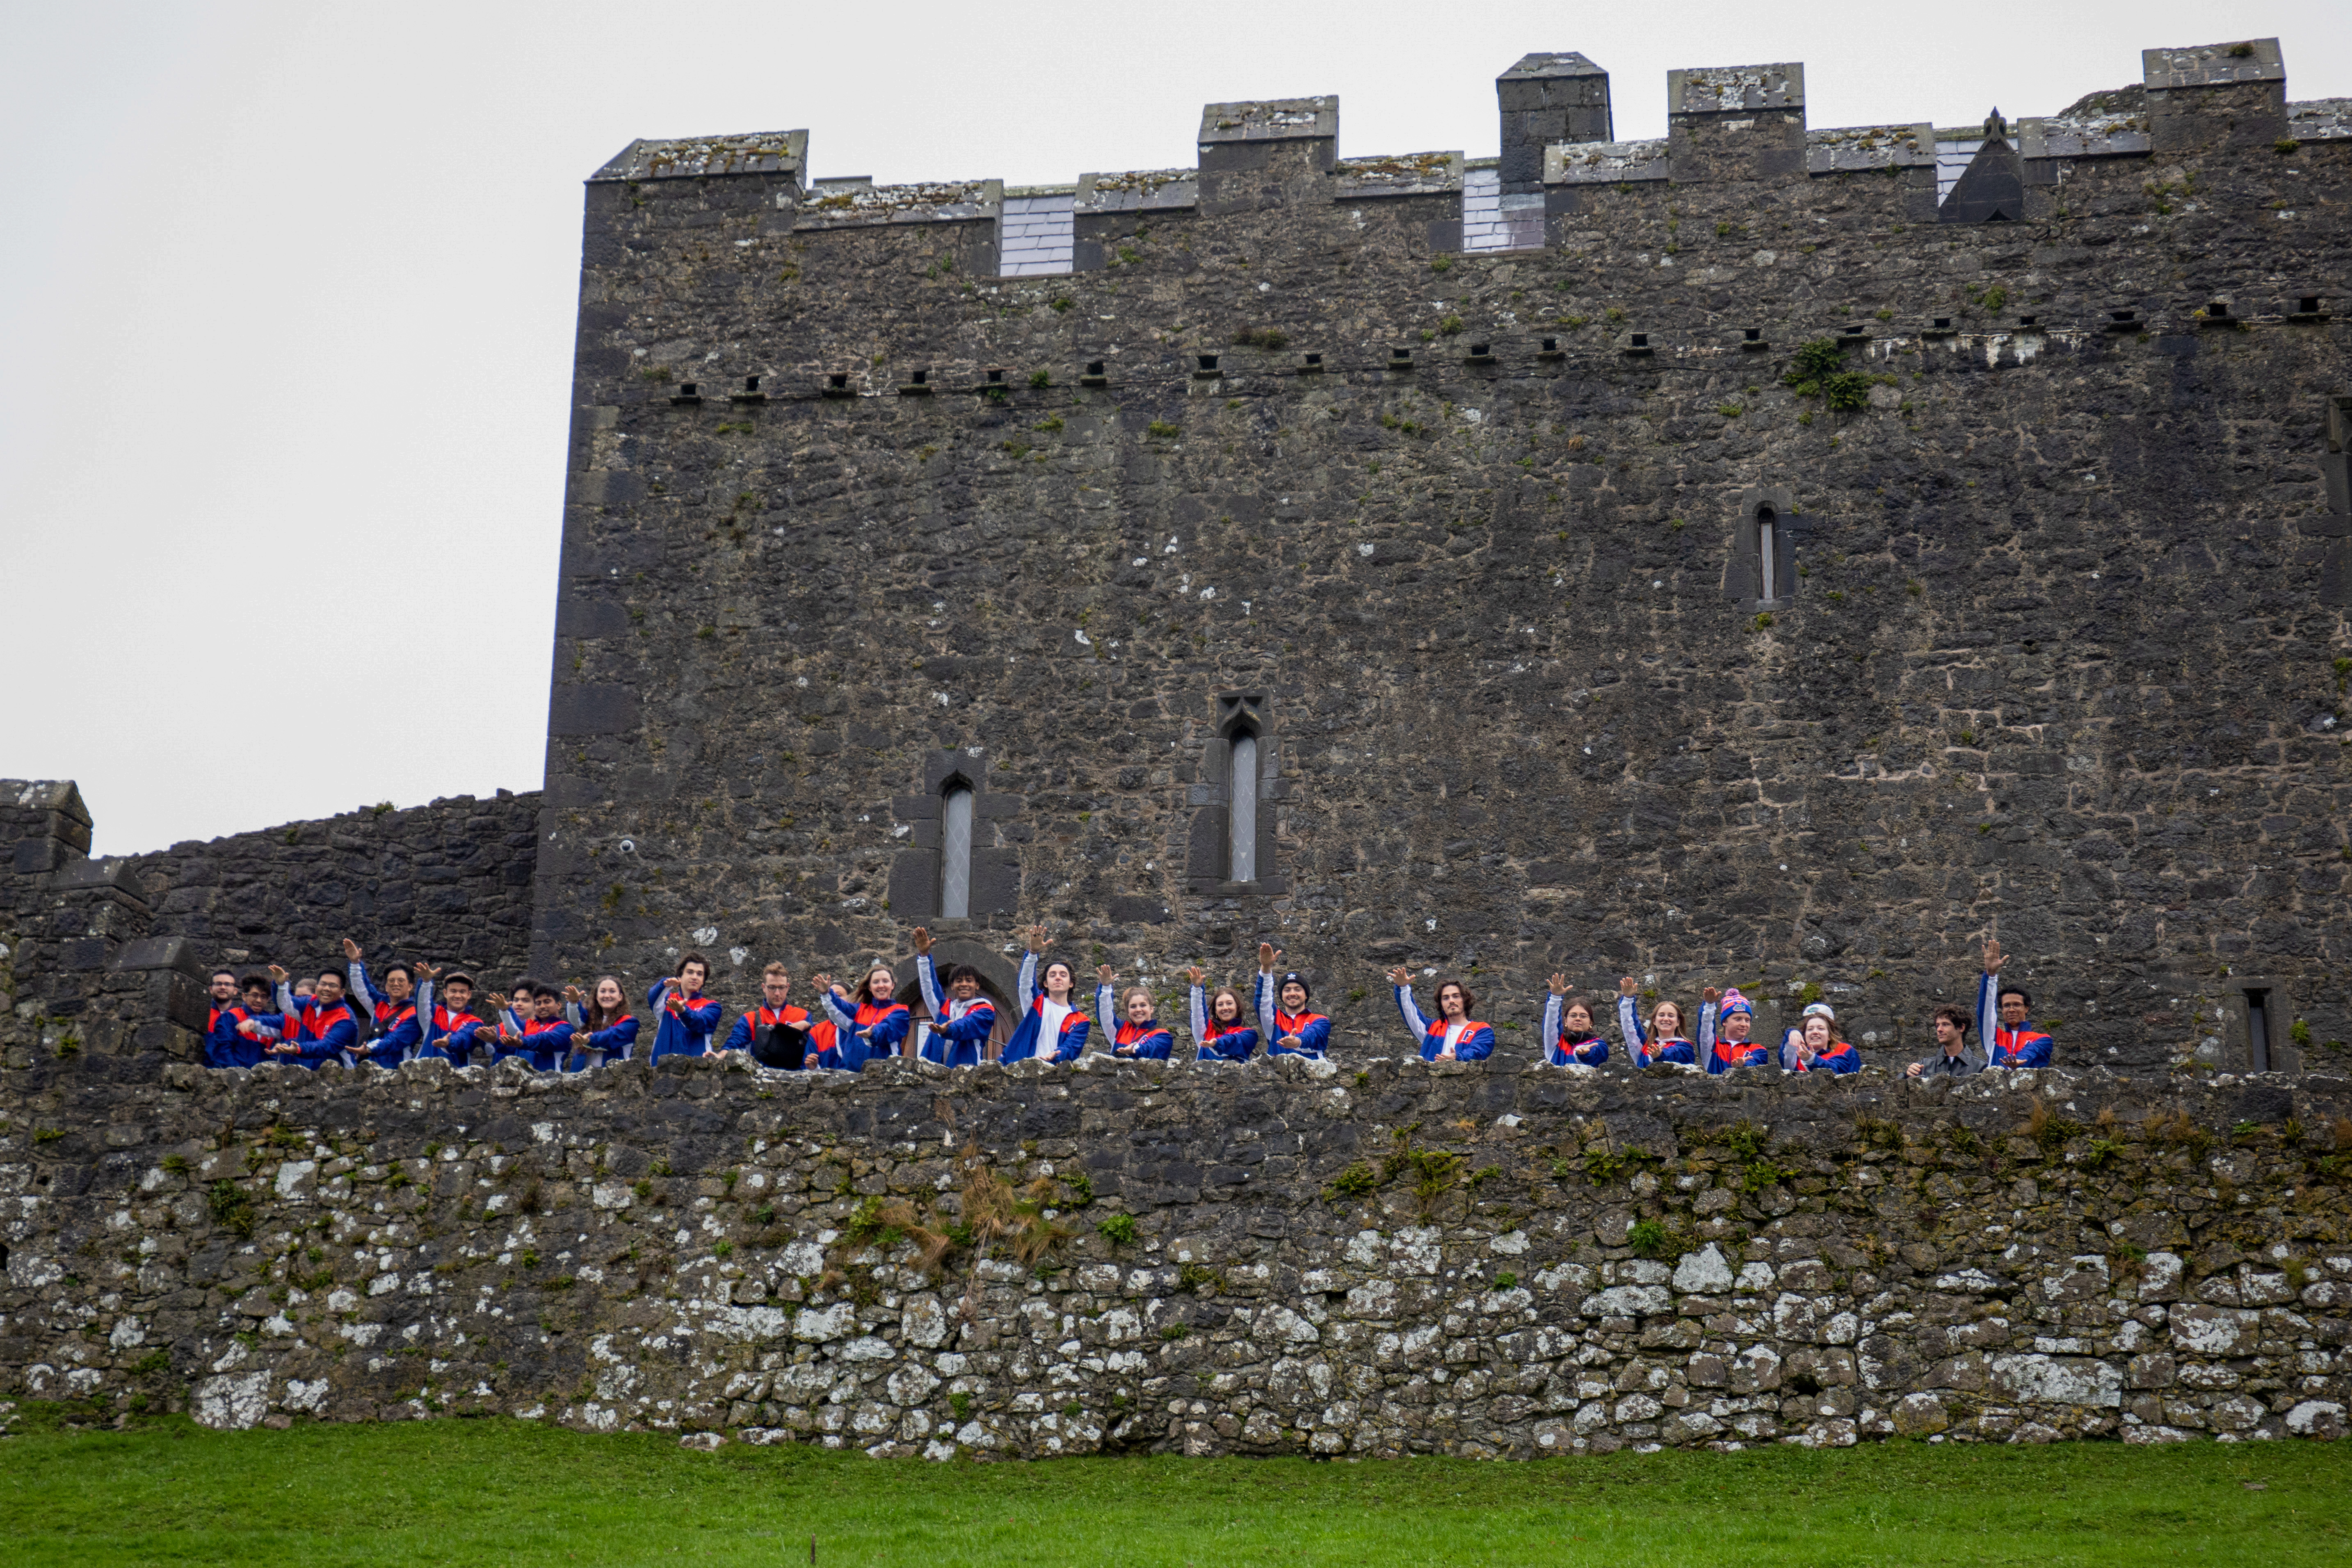 Students do a Gator Chomp at the Rock of Cashel.